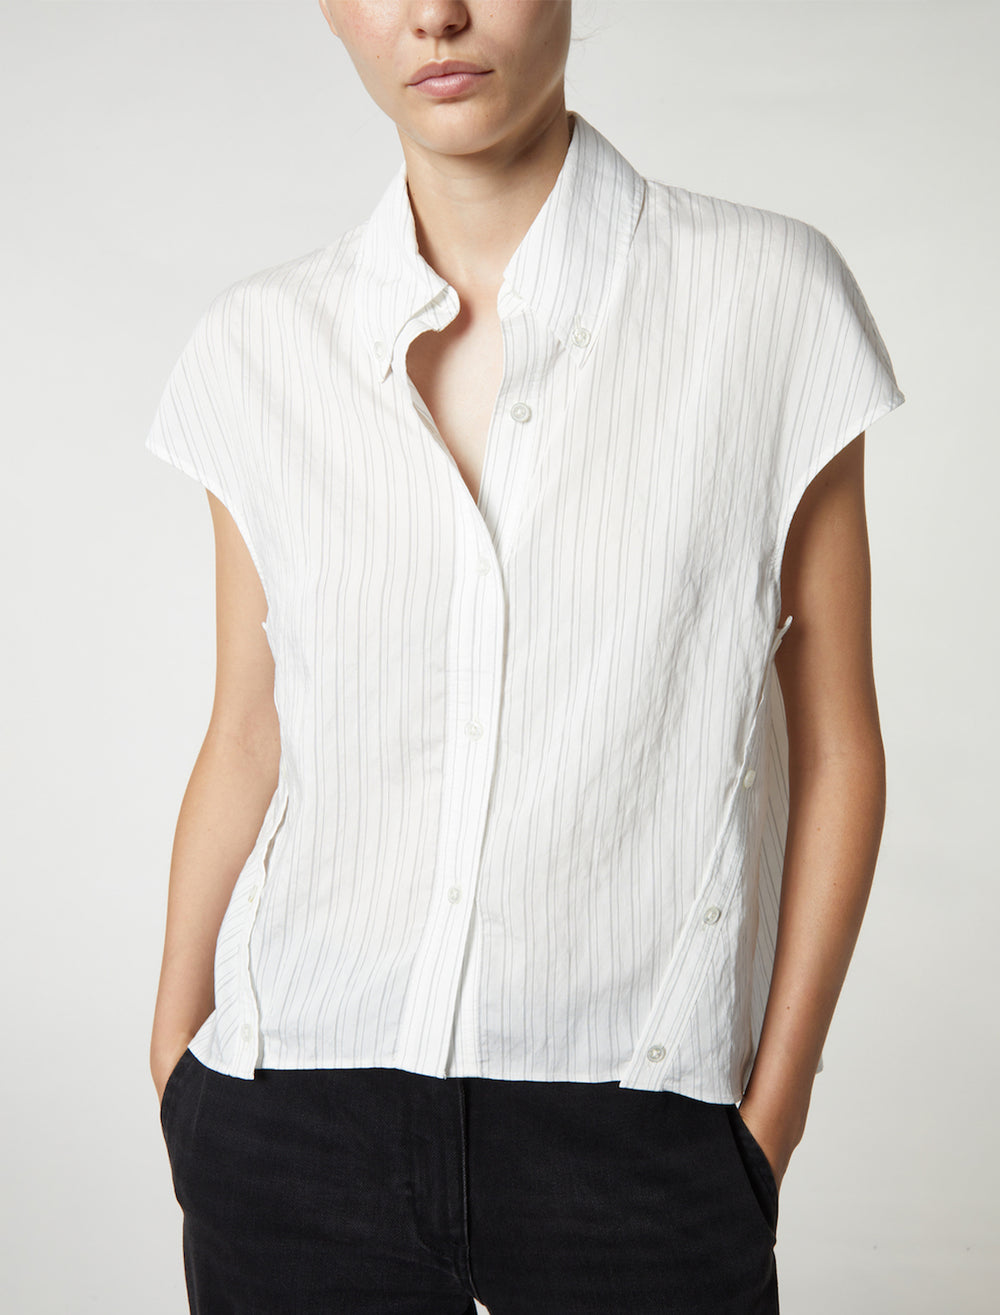 Model wearing Saint Art's perth cap sleeve button blouse in off white pinstripe.